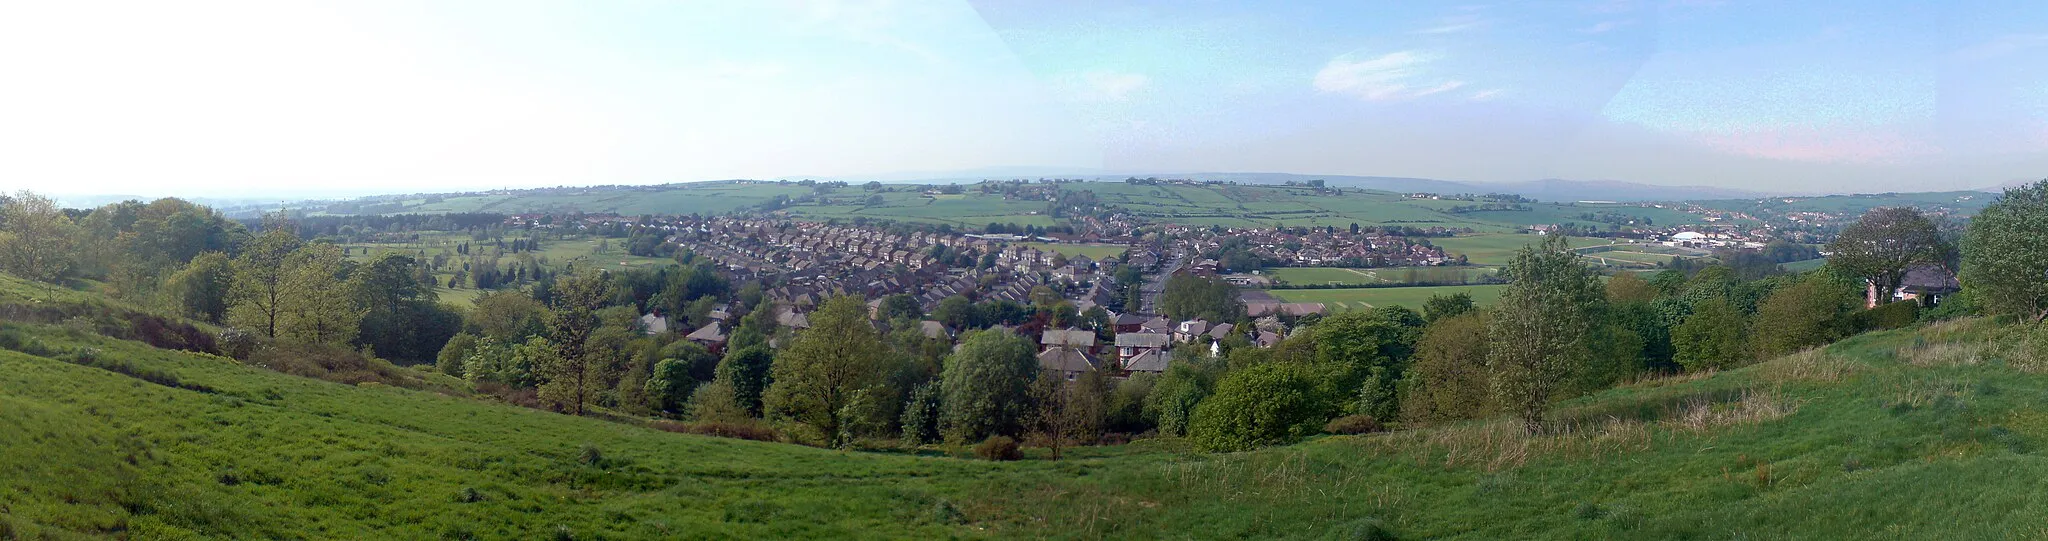 Photo showing: View from the site of the old water tank at the top of Revidge in Blackburn, UK. Shows (from East to West) Blackburn golf course, Beardwood, Lammack and Pleckgate. Lammack Road can be seen in the centre of the picture leading up to Ramsgreave in the North.